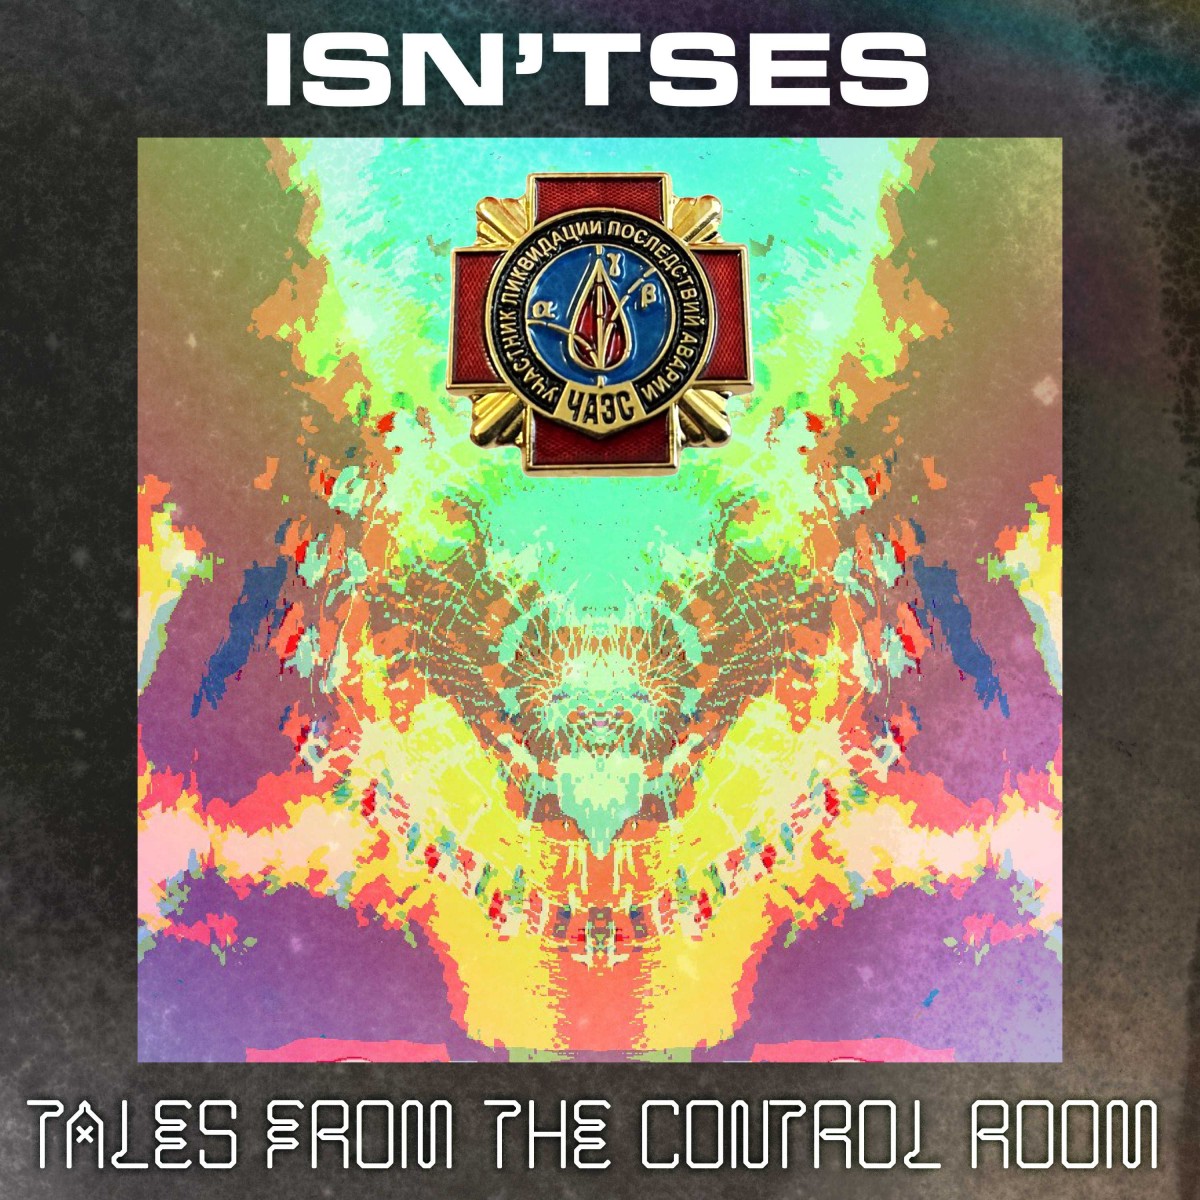 Isn'tses -Tales From The Control Room- album cover.jpg